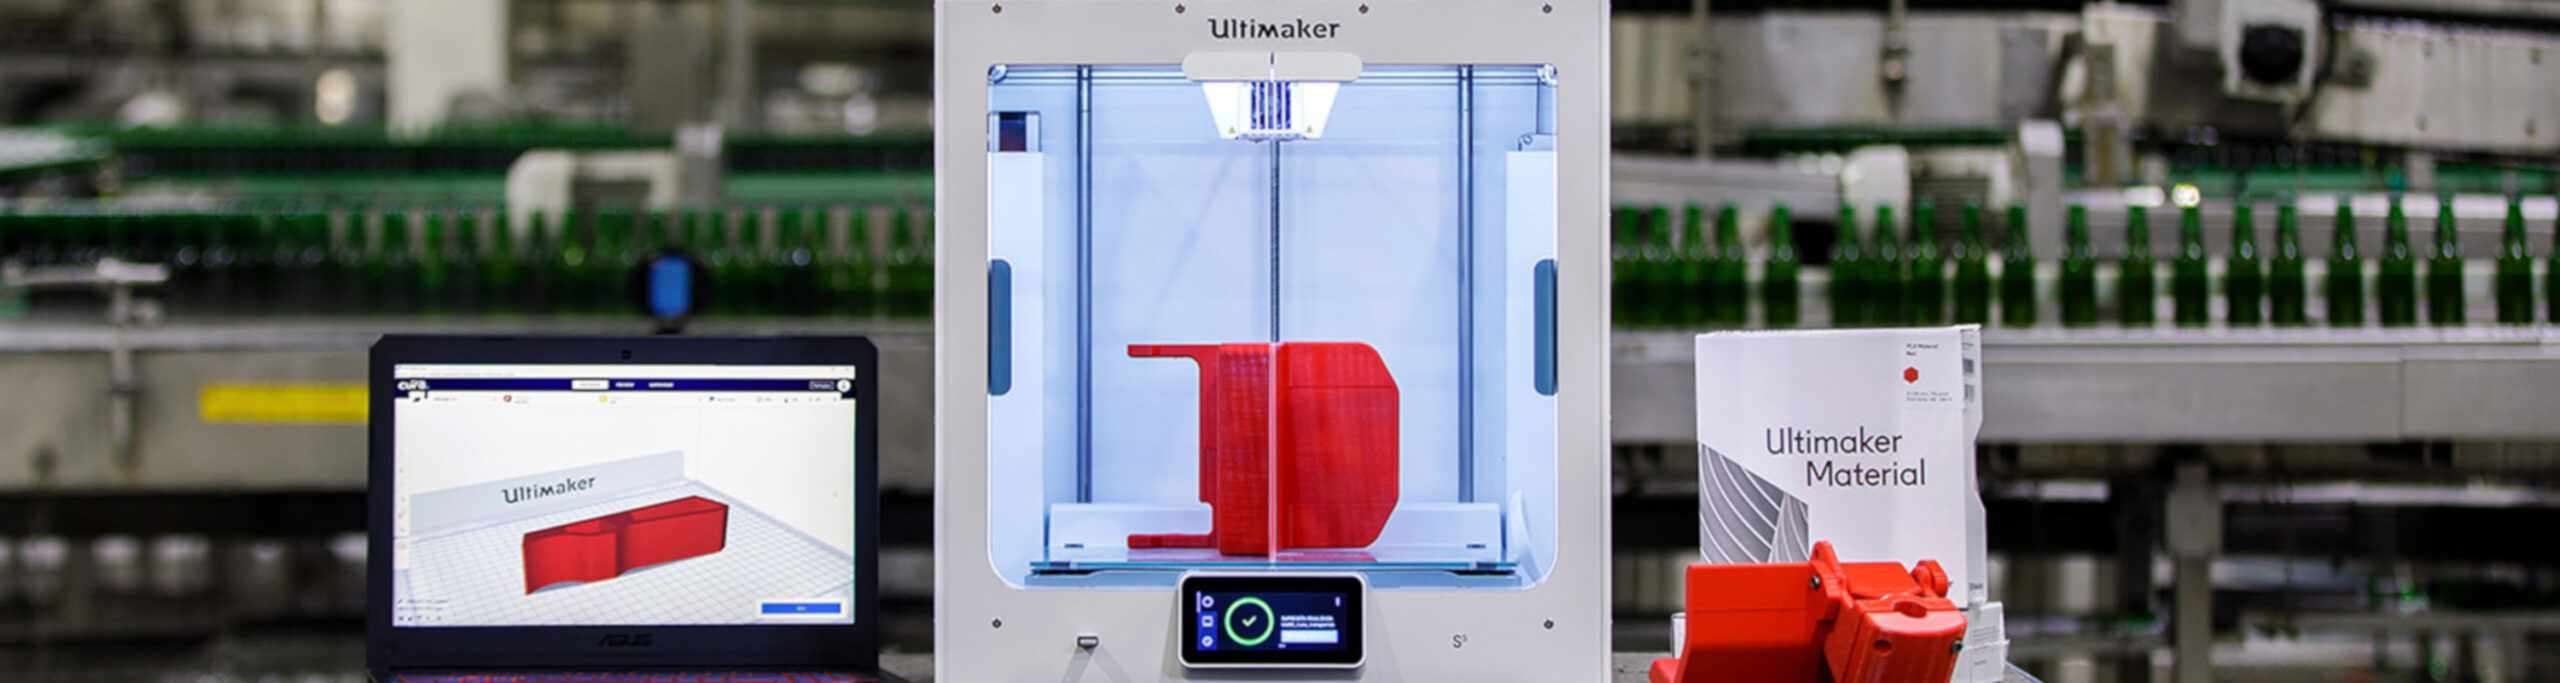 heineken-ultimaker-ensuring-production-continuity-with-3d-printing-1